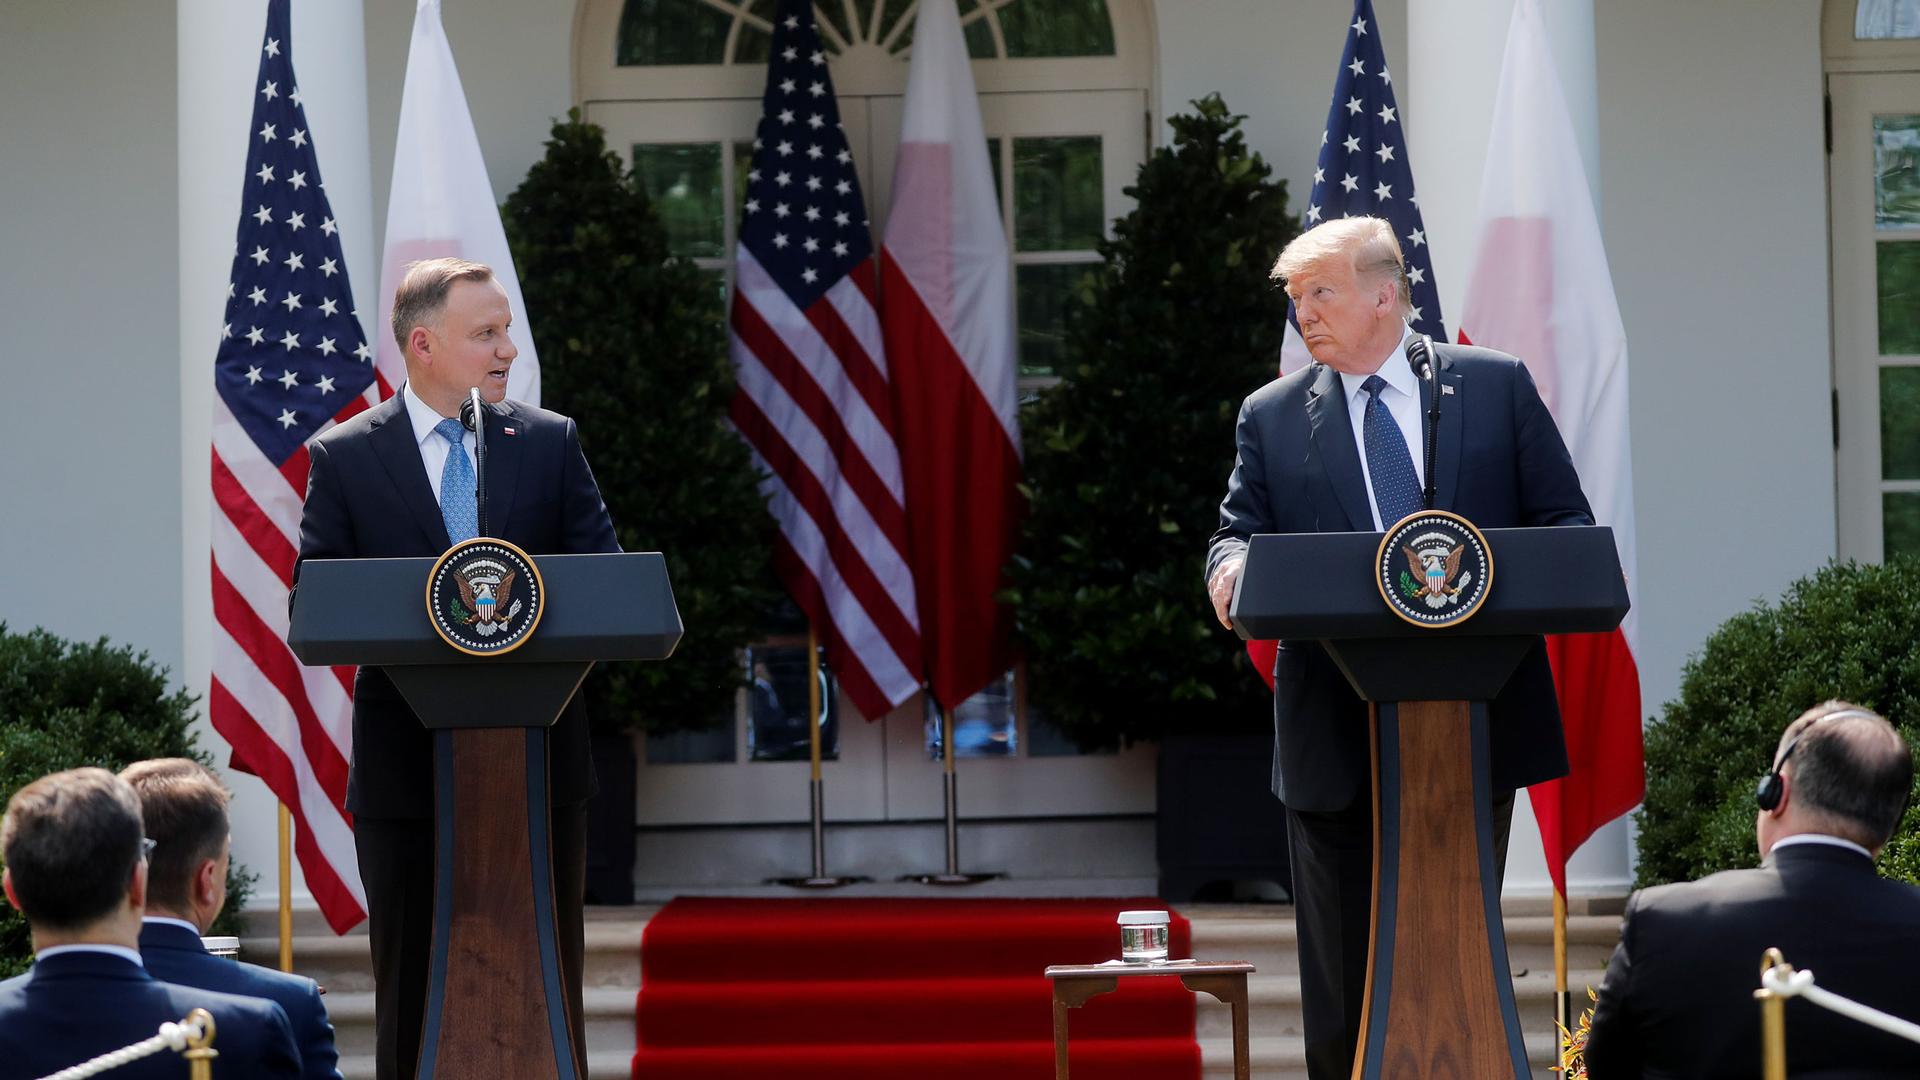 Two white men in suits stand at podiums in front of the US and Polish flags